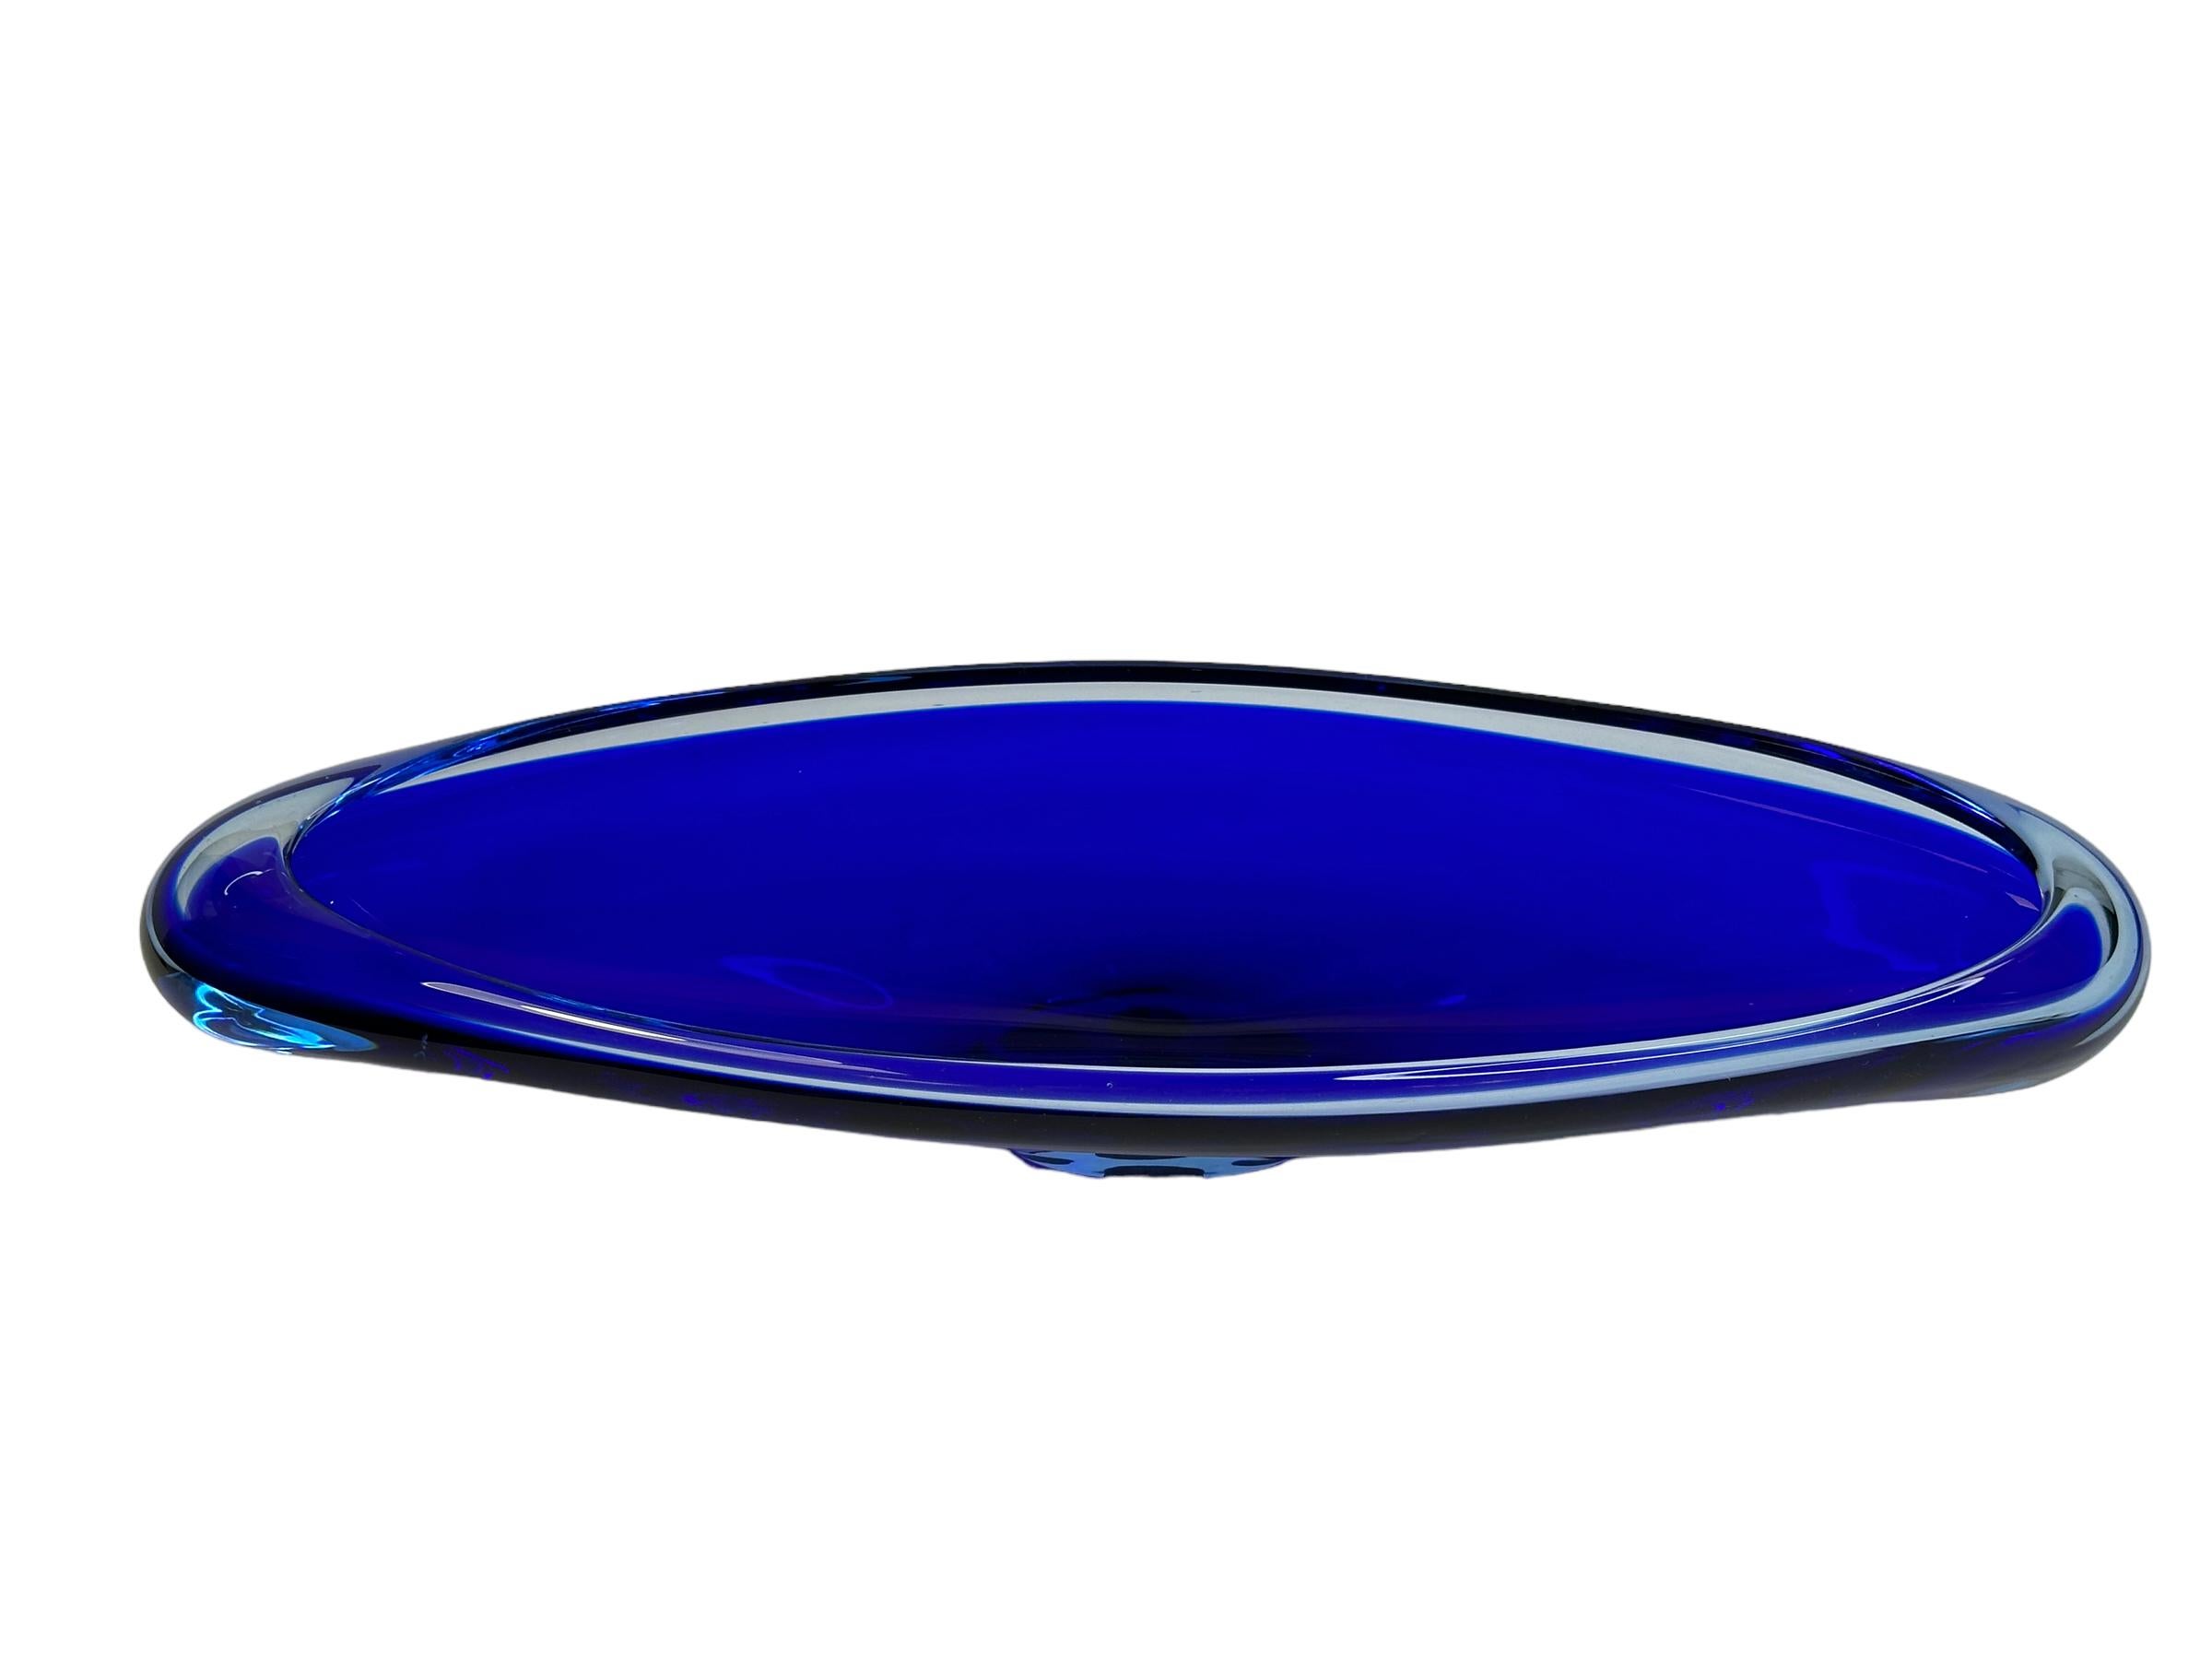 Mid-Century Modern Sommerso Murano Glass Fruit Bowl Catchall, Blue and Clear, Vintage, Italy, 1970s For Sale